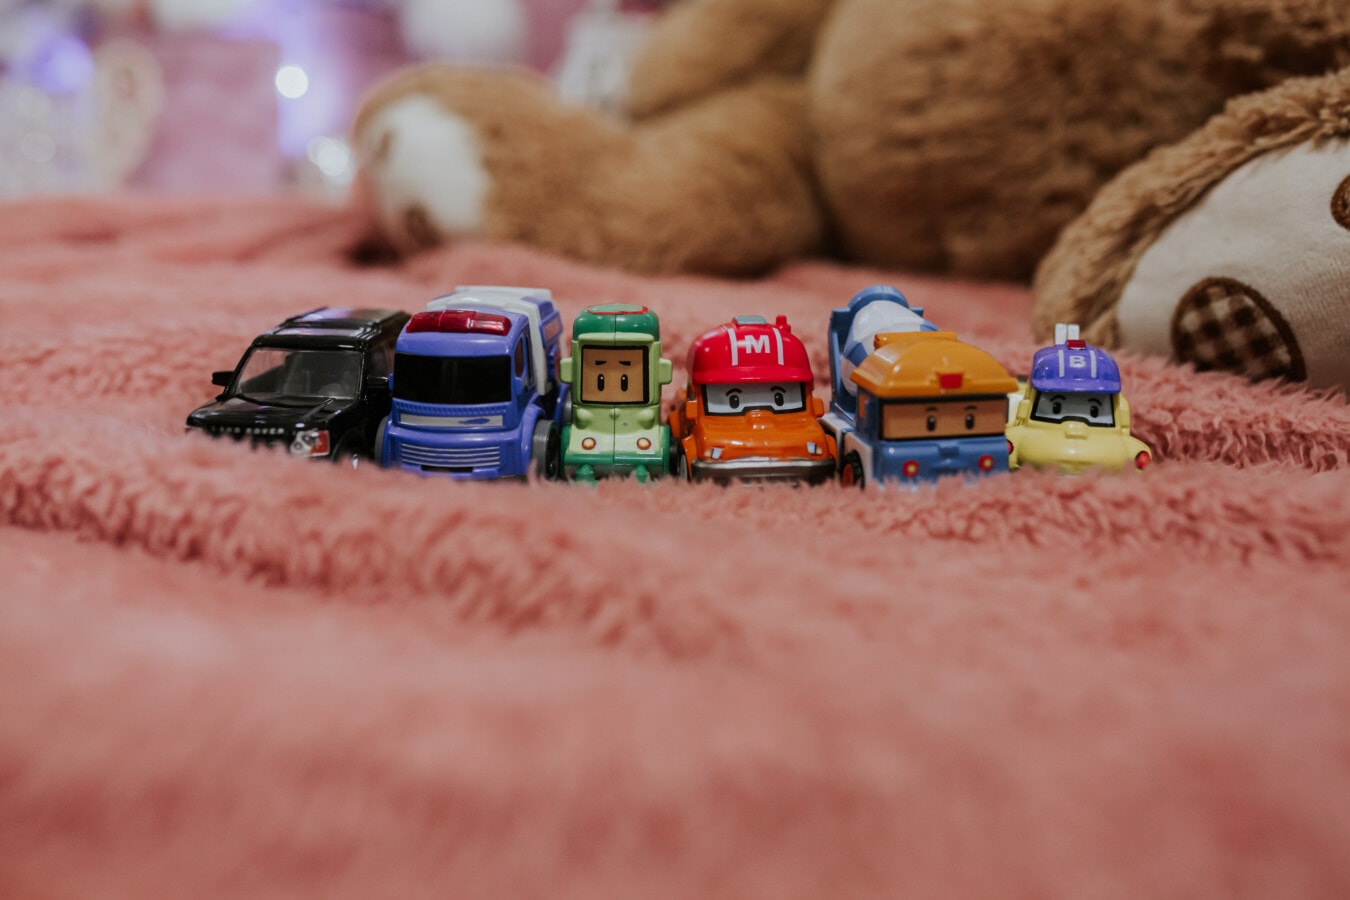 toys, vehicles, miniature, teddy bear toy, collection, blanket, bedroom, toy, vintage, childhood